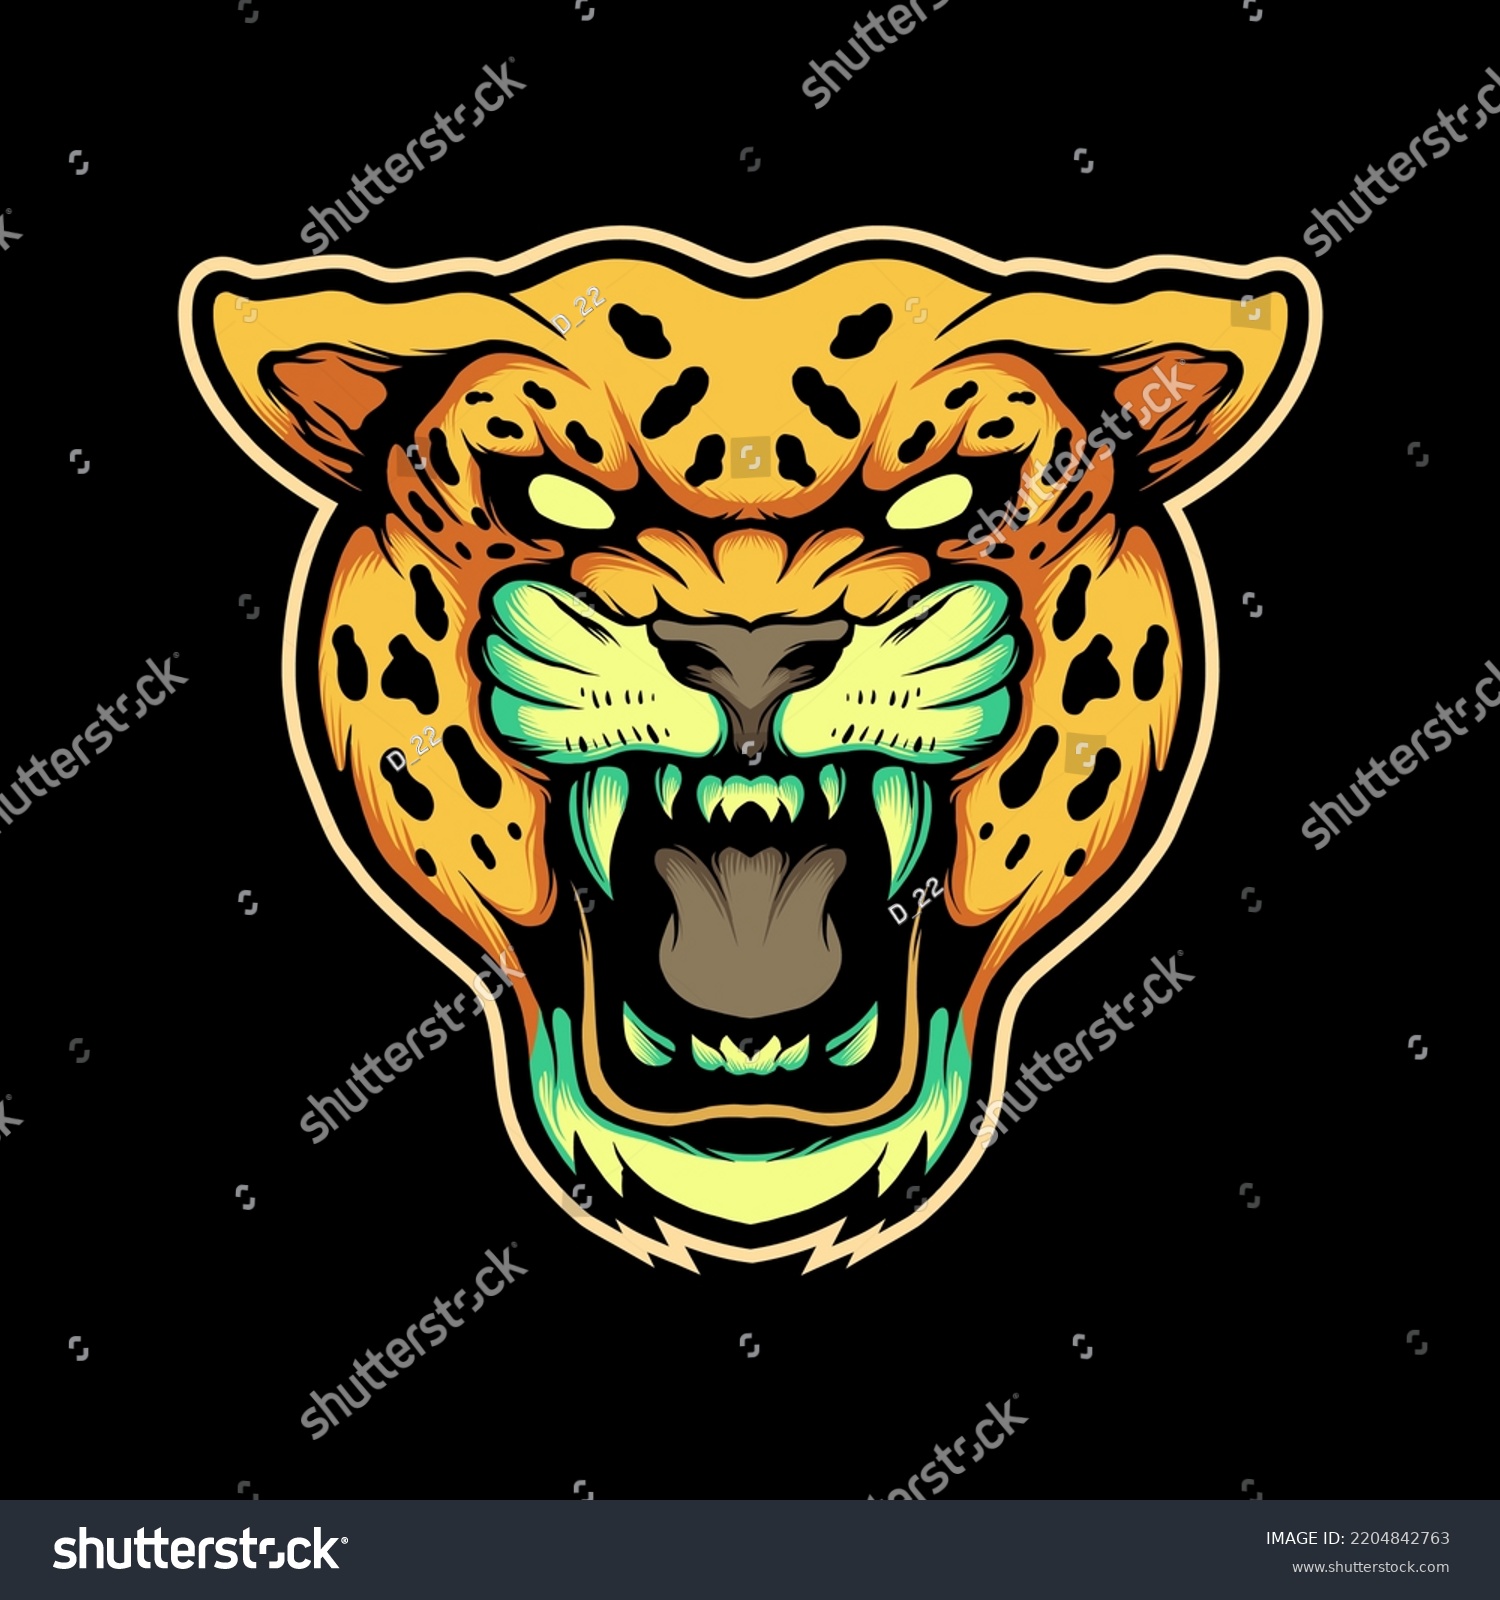 Jaguar Head Vector Illustration Angry Face Stock Vector (Royalty Free ...